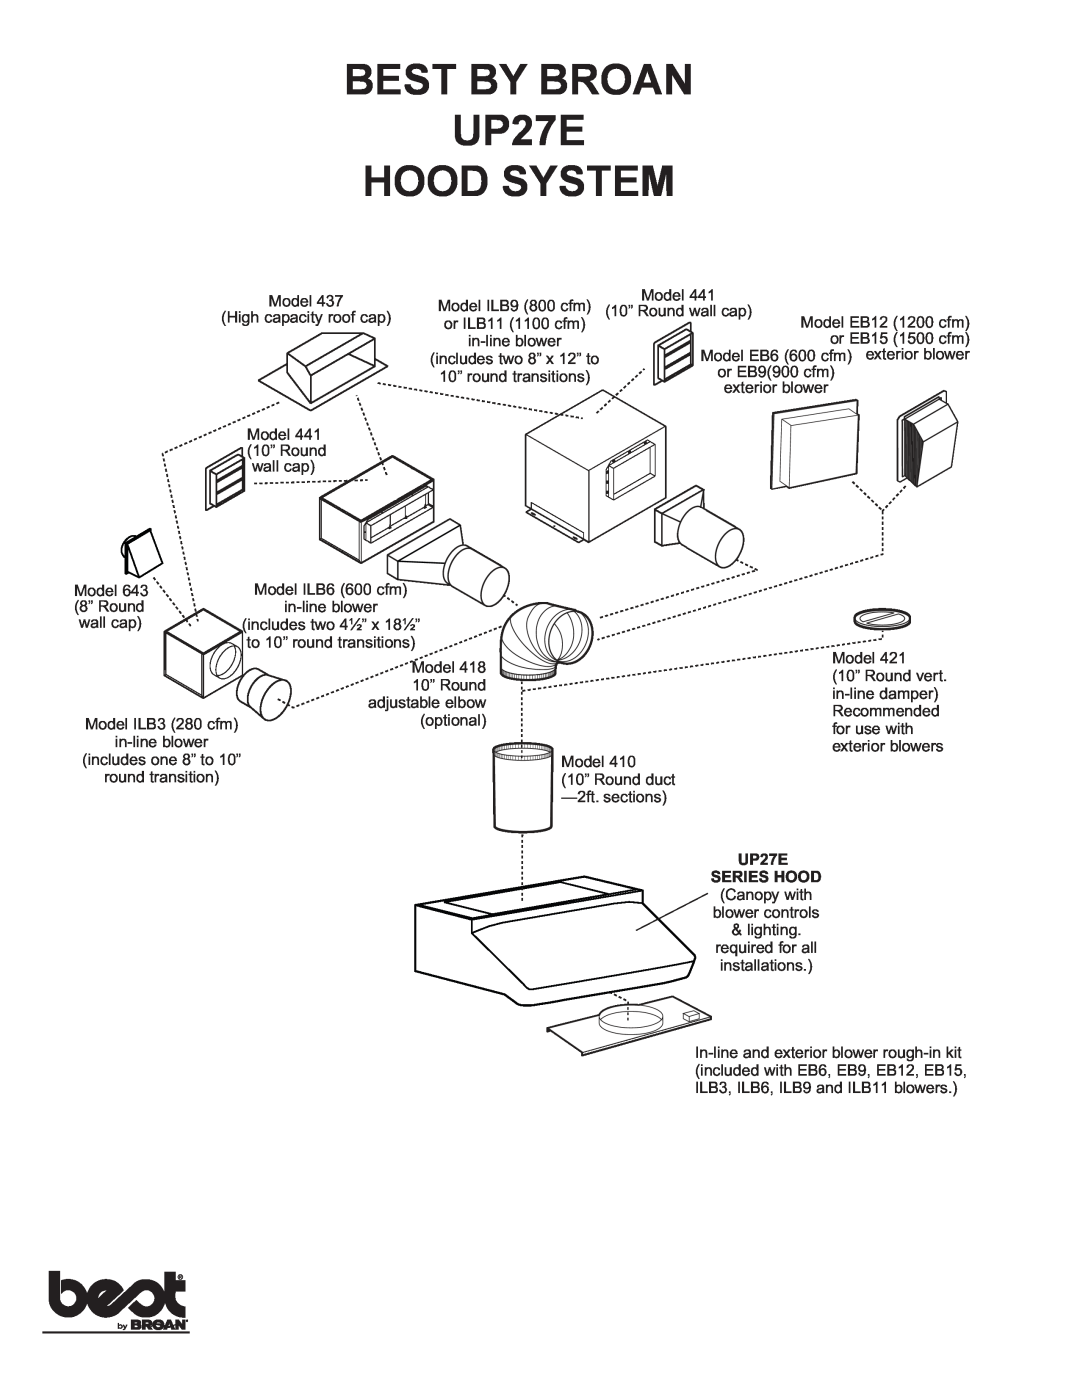 Best specifications BEST BY BROAN UP27E HOOD SYSTEM, UP27E SERIES HOOD 